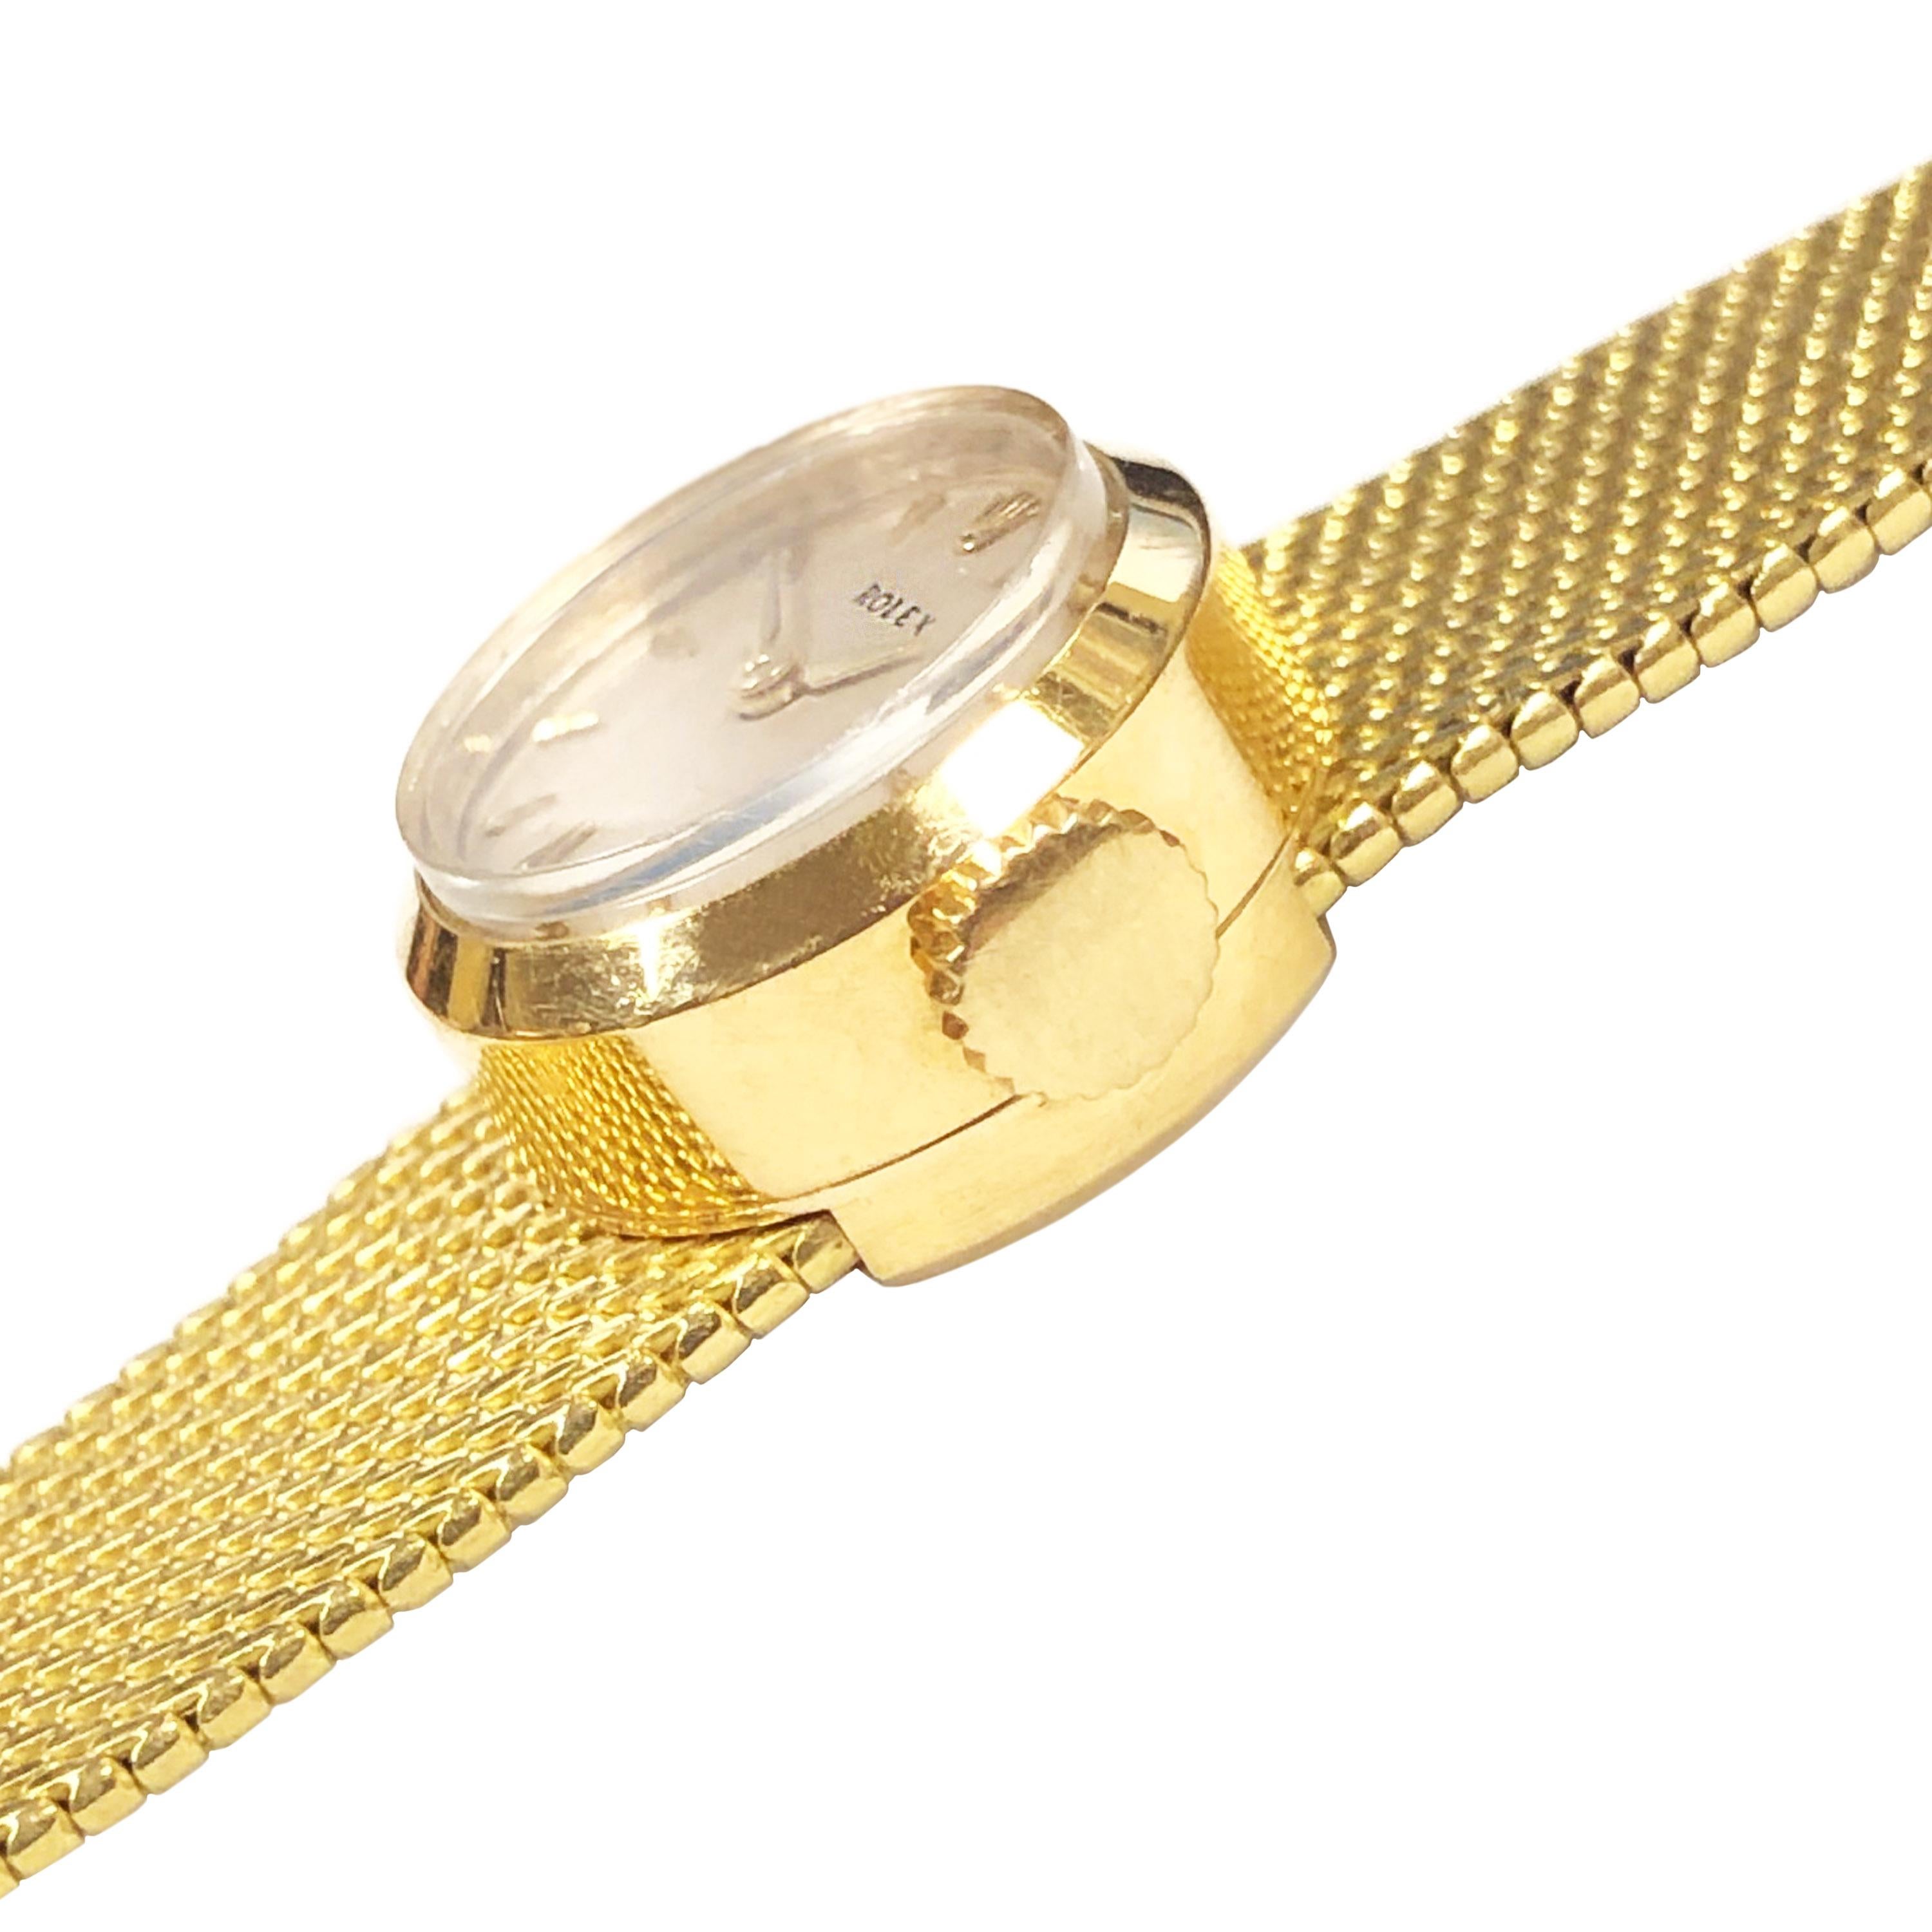 Circa 1960 Rolex Ladies Orchid Wrist Watch, 15 MM 18K Yellow Gold 2 piece case. 17 Jewel mechanical, Manual wind movement. Original Silver Dial with raised Gold markers. 1/2 inch wide Rolex signed soft mesh bracelet. The watch has a release lever on